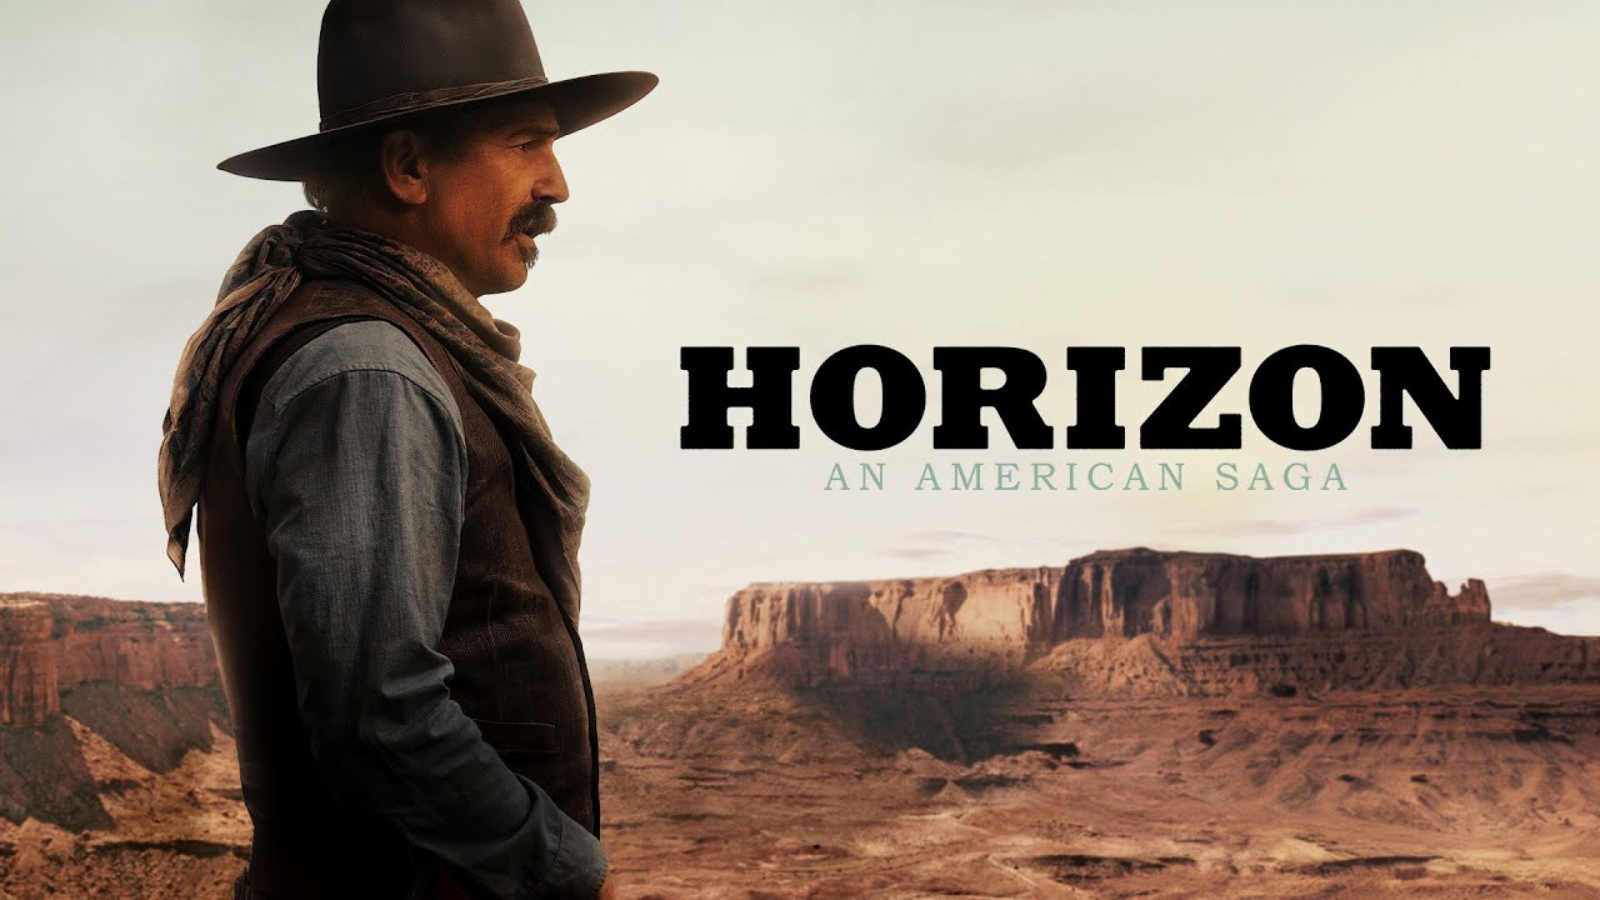 Kevin Costners Horizon An American Saga Sequel DELAYED Due To Poor Box Office Details Inside